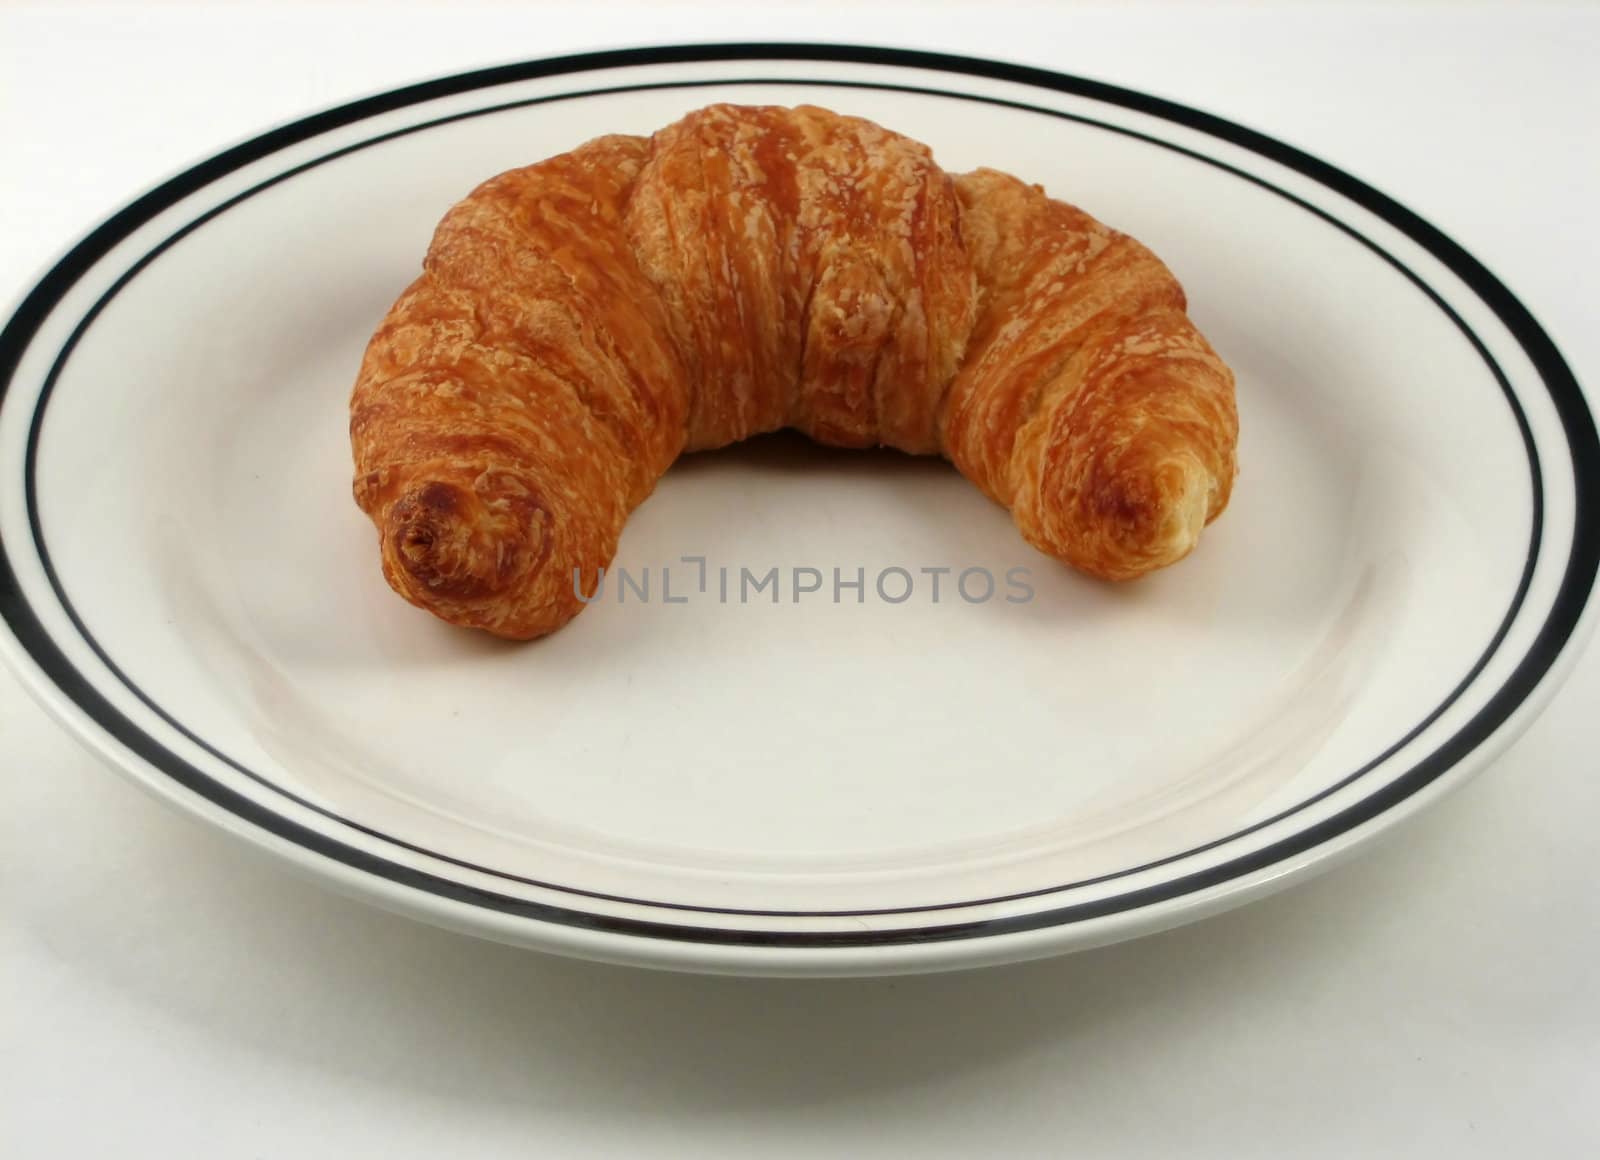 Pictures of croissants used for breakfast